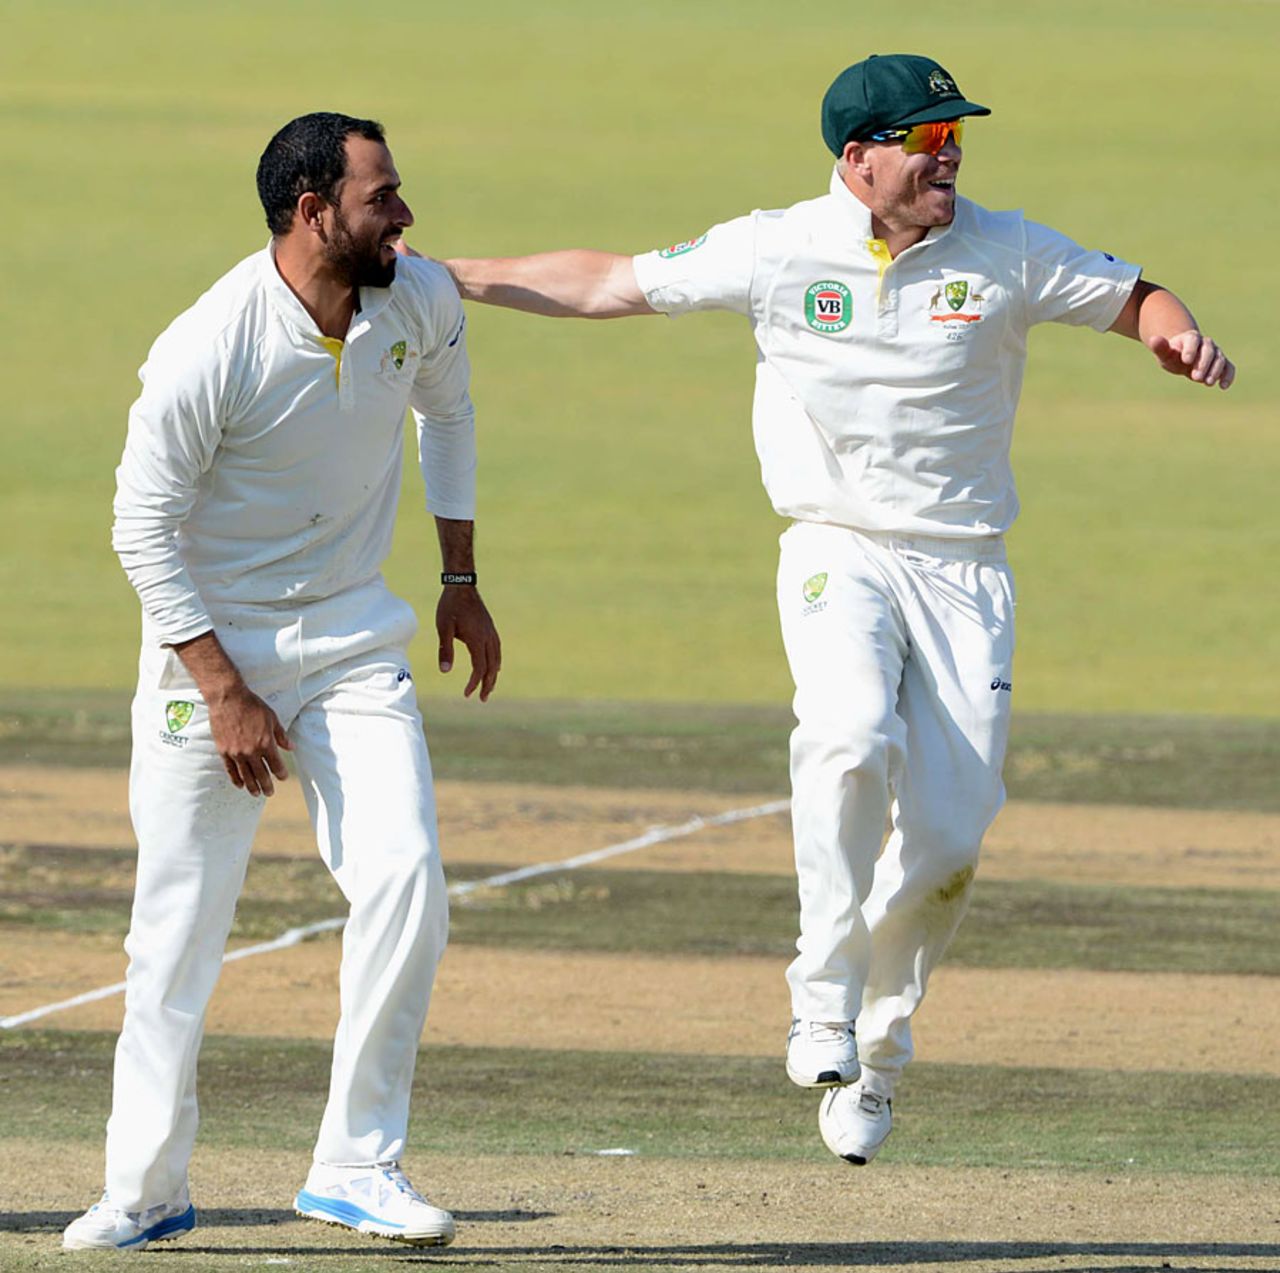 David Warner runs to congratulate Fawad Ahmed after a wicket, South Africa A v Australia A, 1st unofficial Test, 2nd day, Pretoria, July 25, 2013